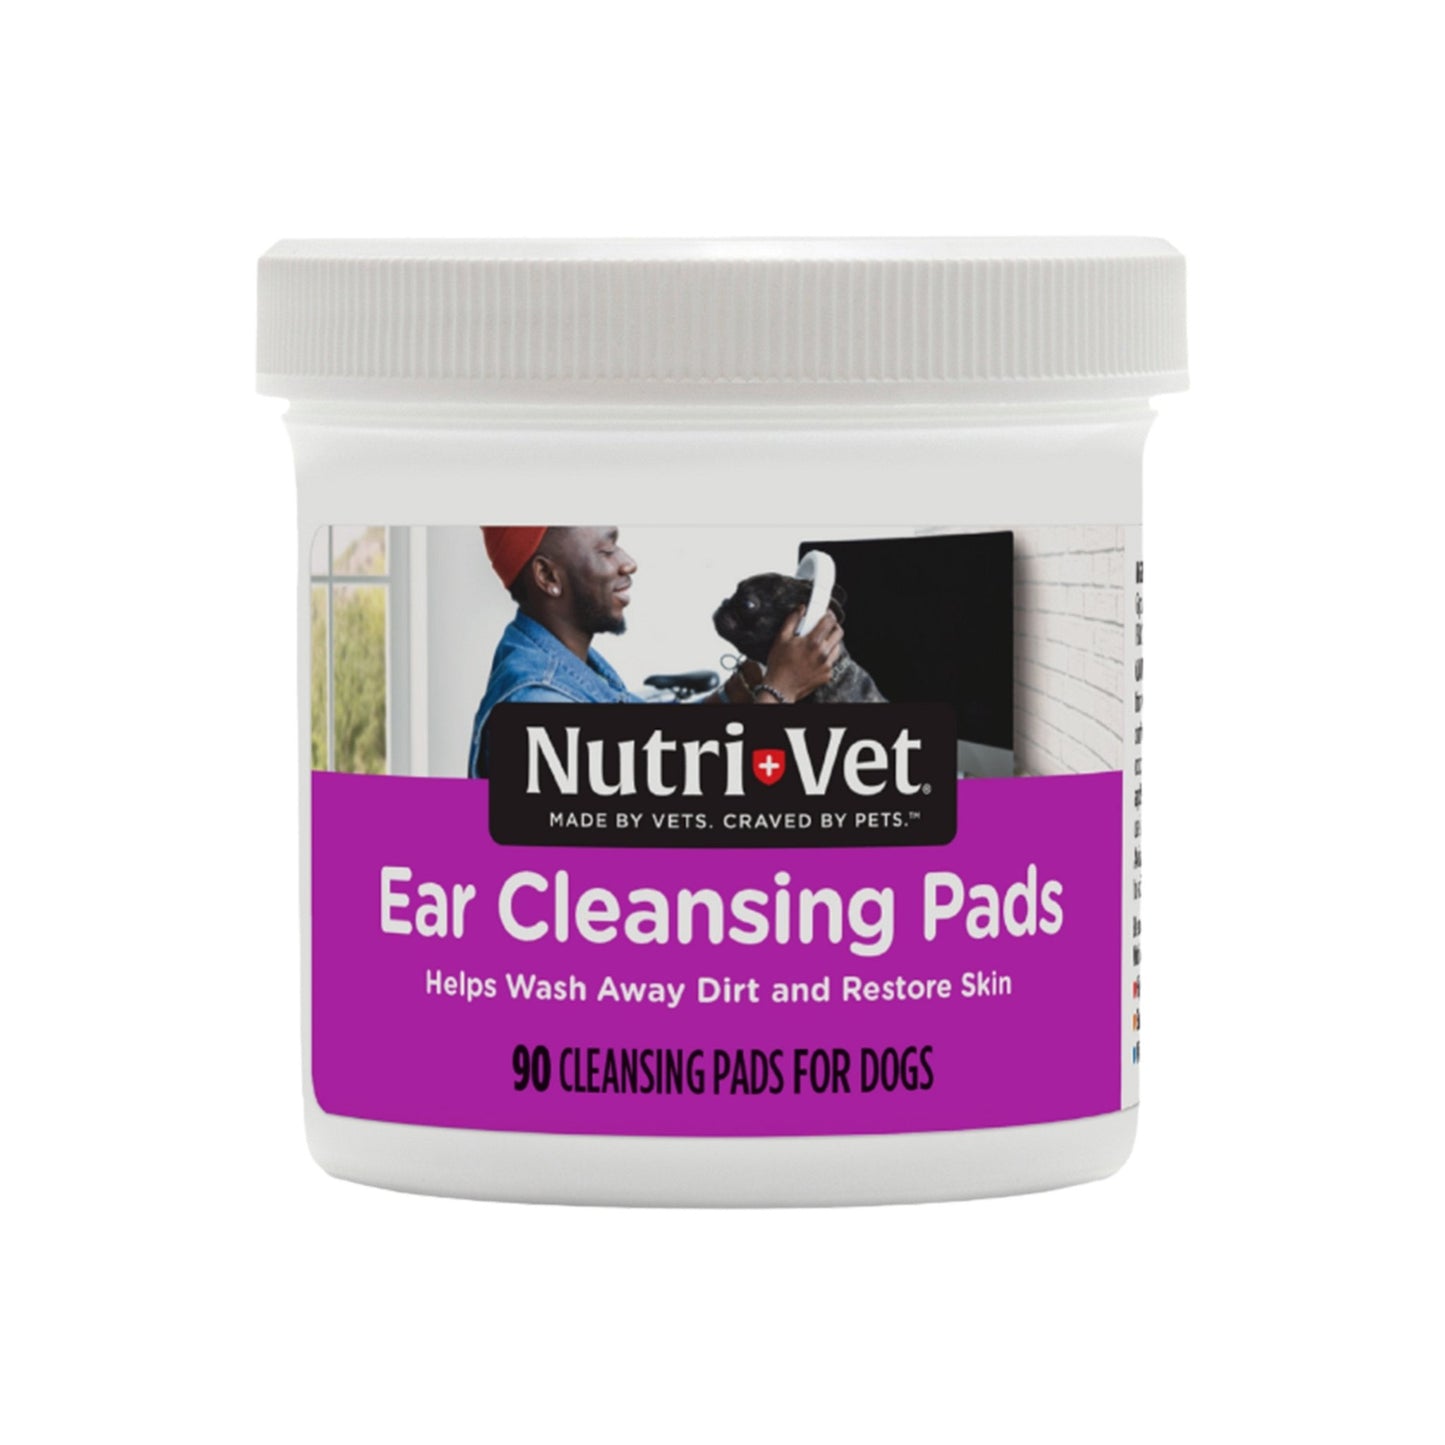 Nutri-Vet Ear Cleansing Pads for Dogs 90ct - Kwik Pets